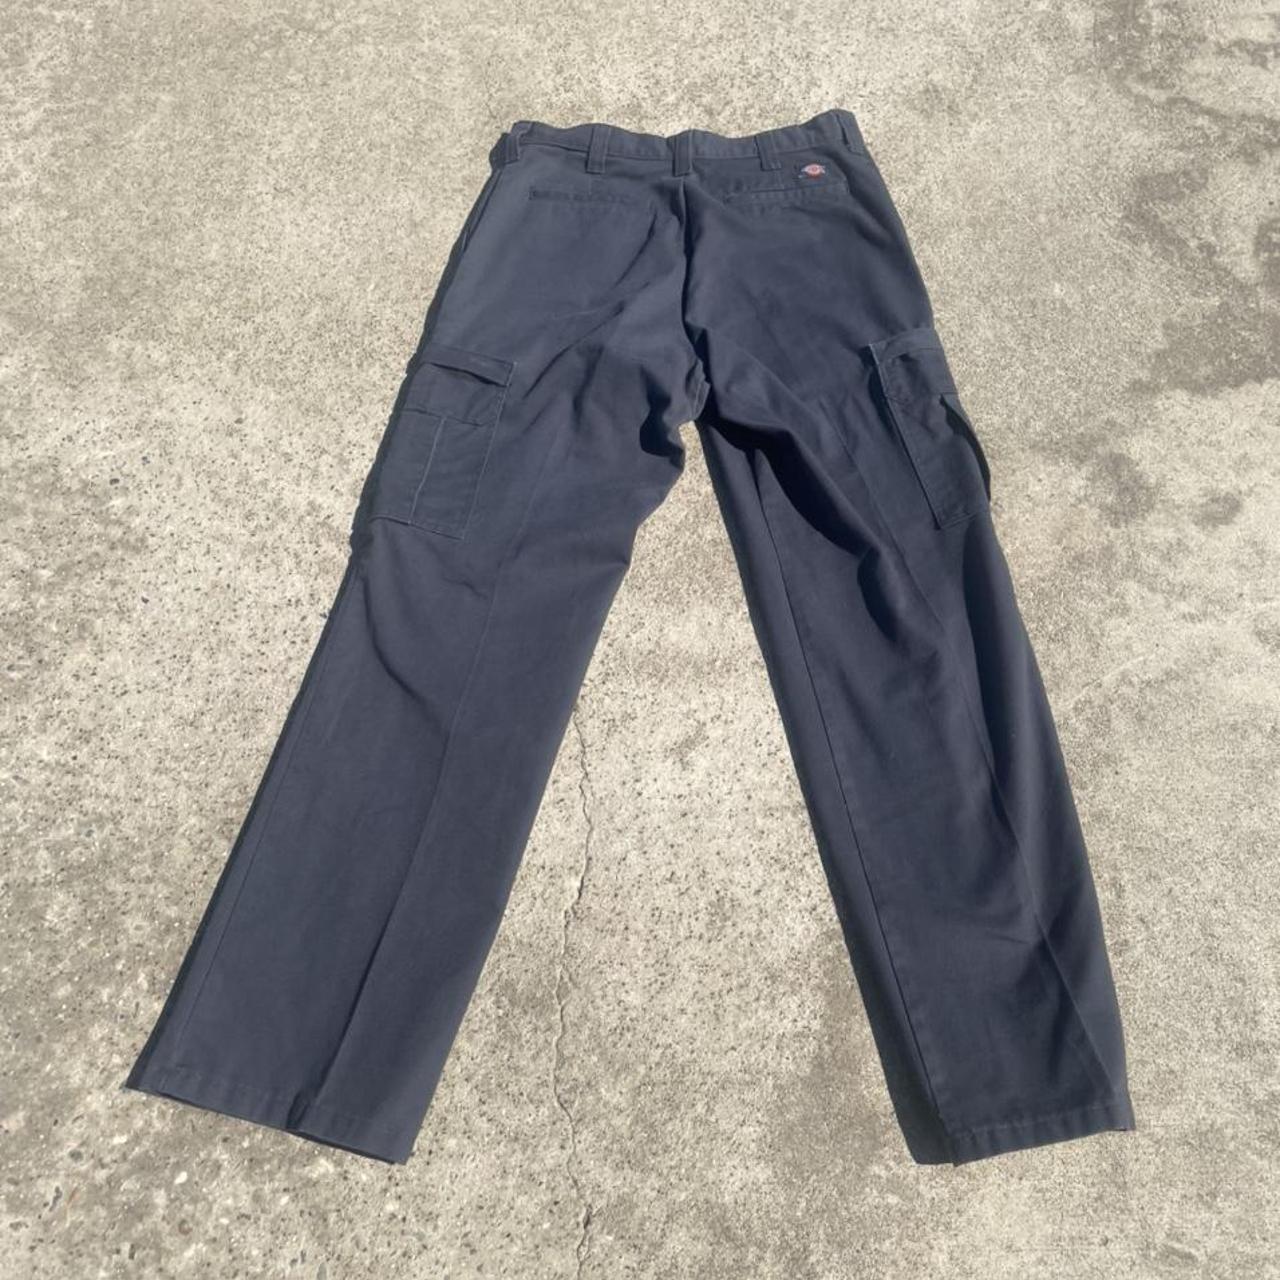 Dickies cargo pants, navy pants with big pockets on... - Depop